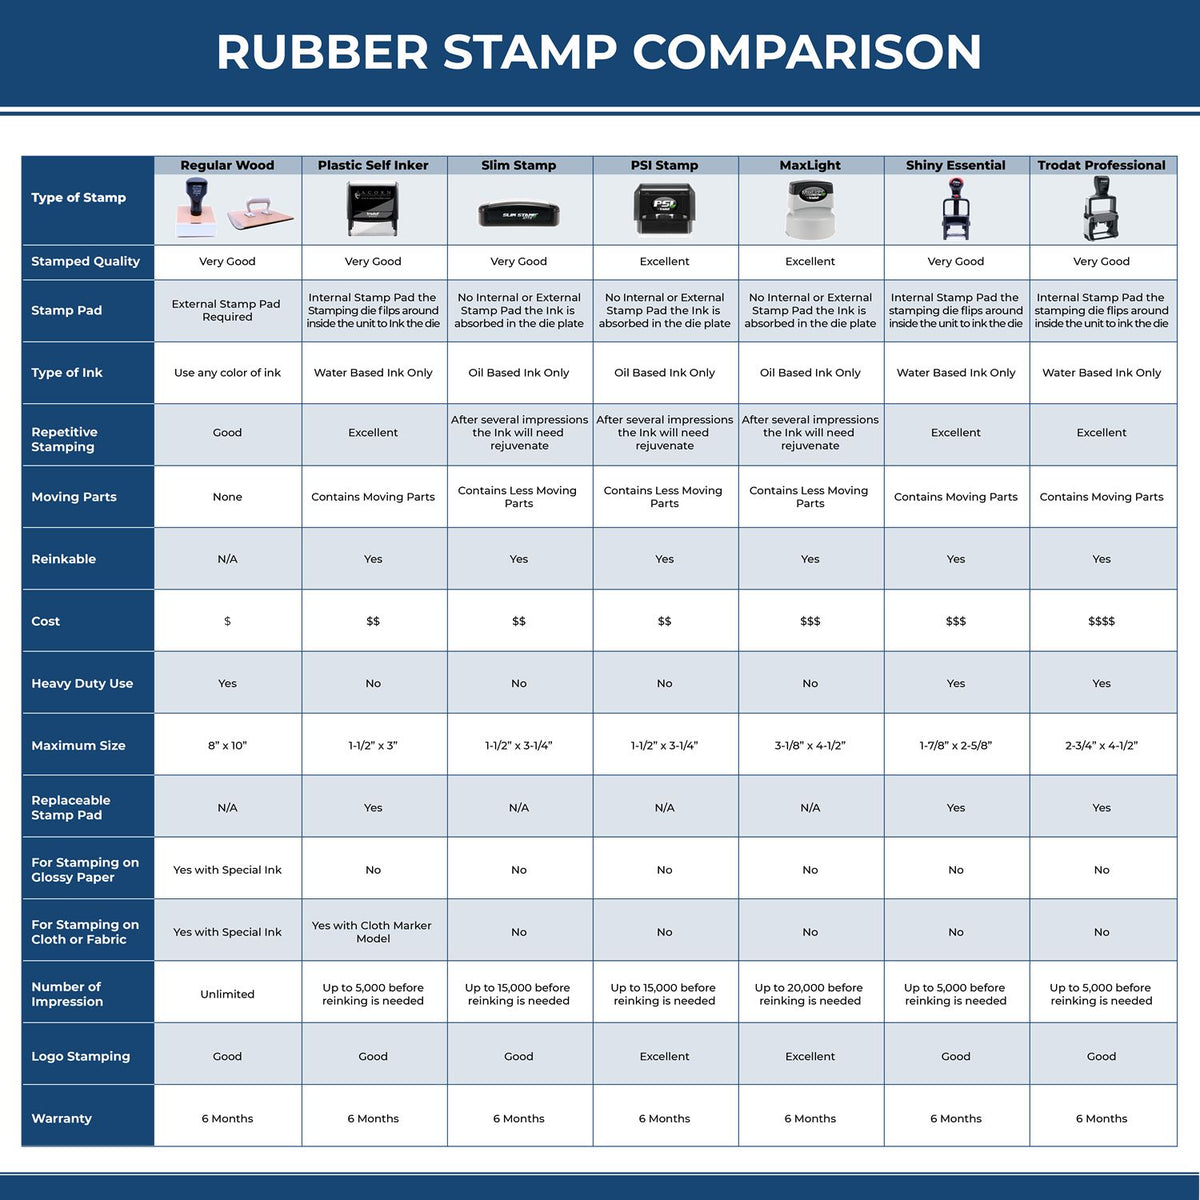 A comparison chart for the different types of mount models available for the Wooden Handle Colorado Rectangular Notary Public Stamp.